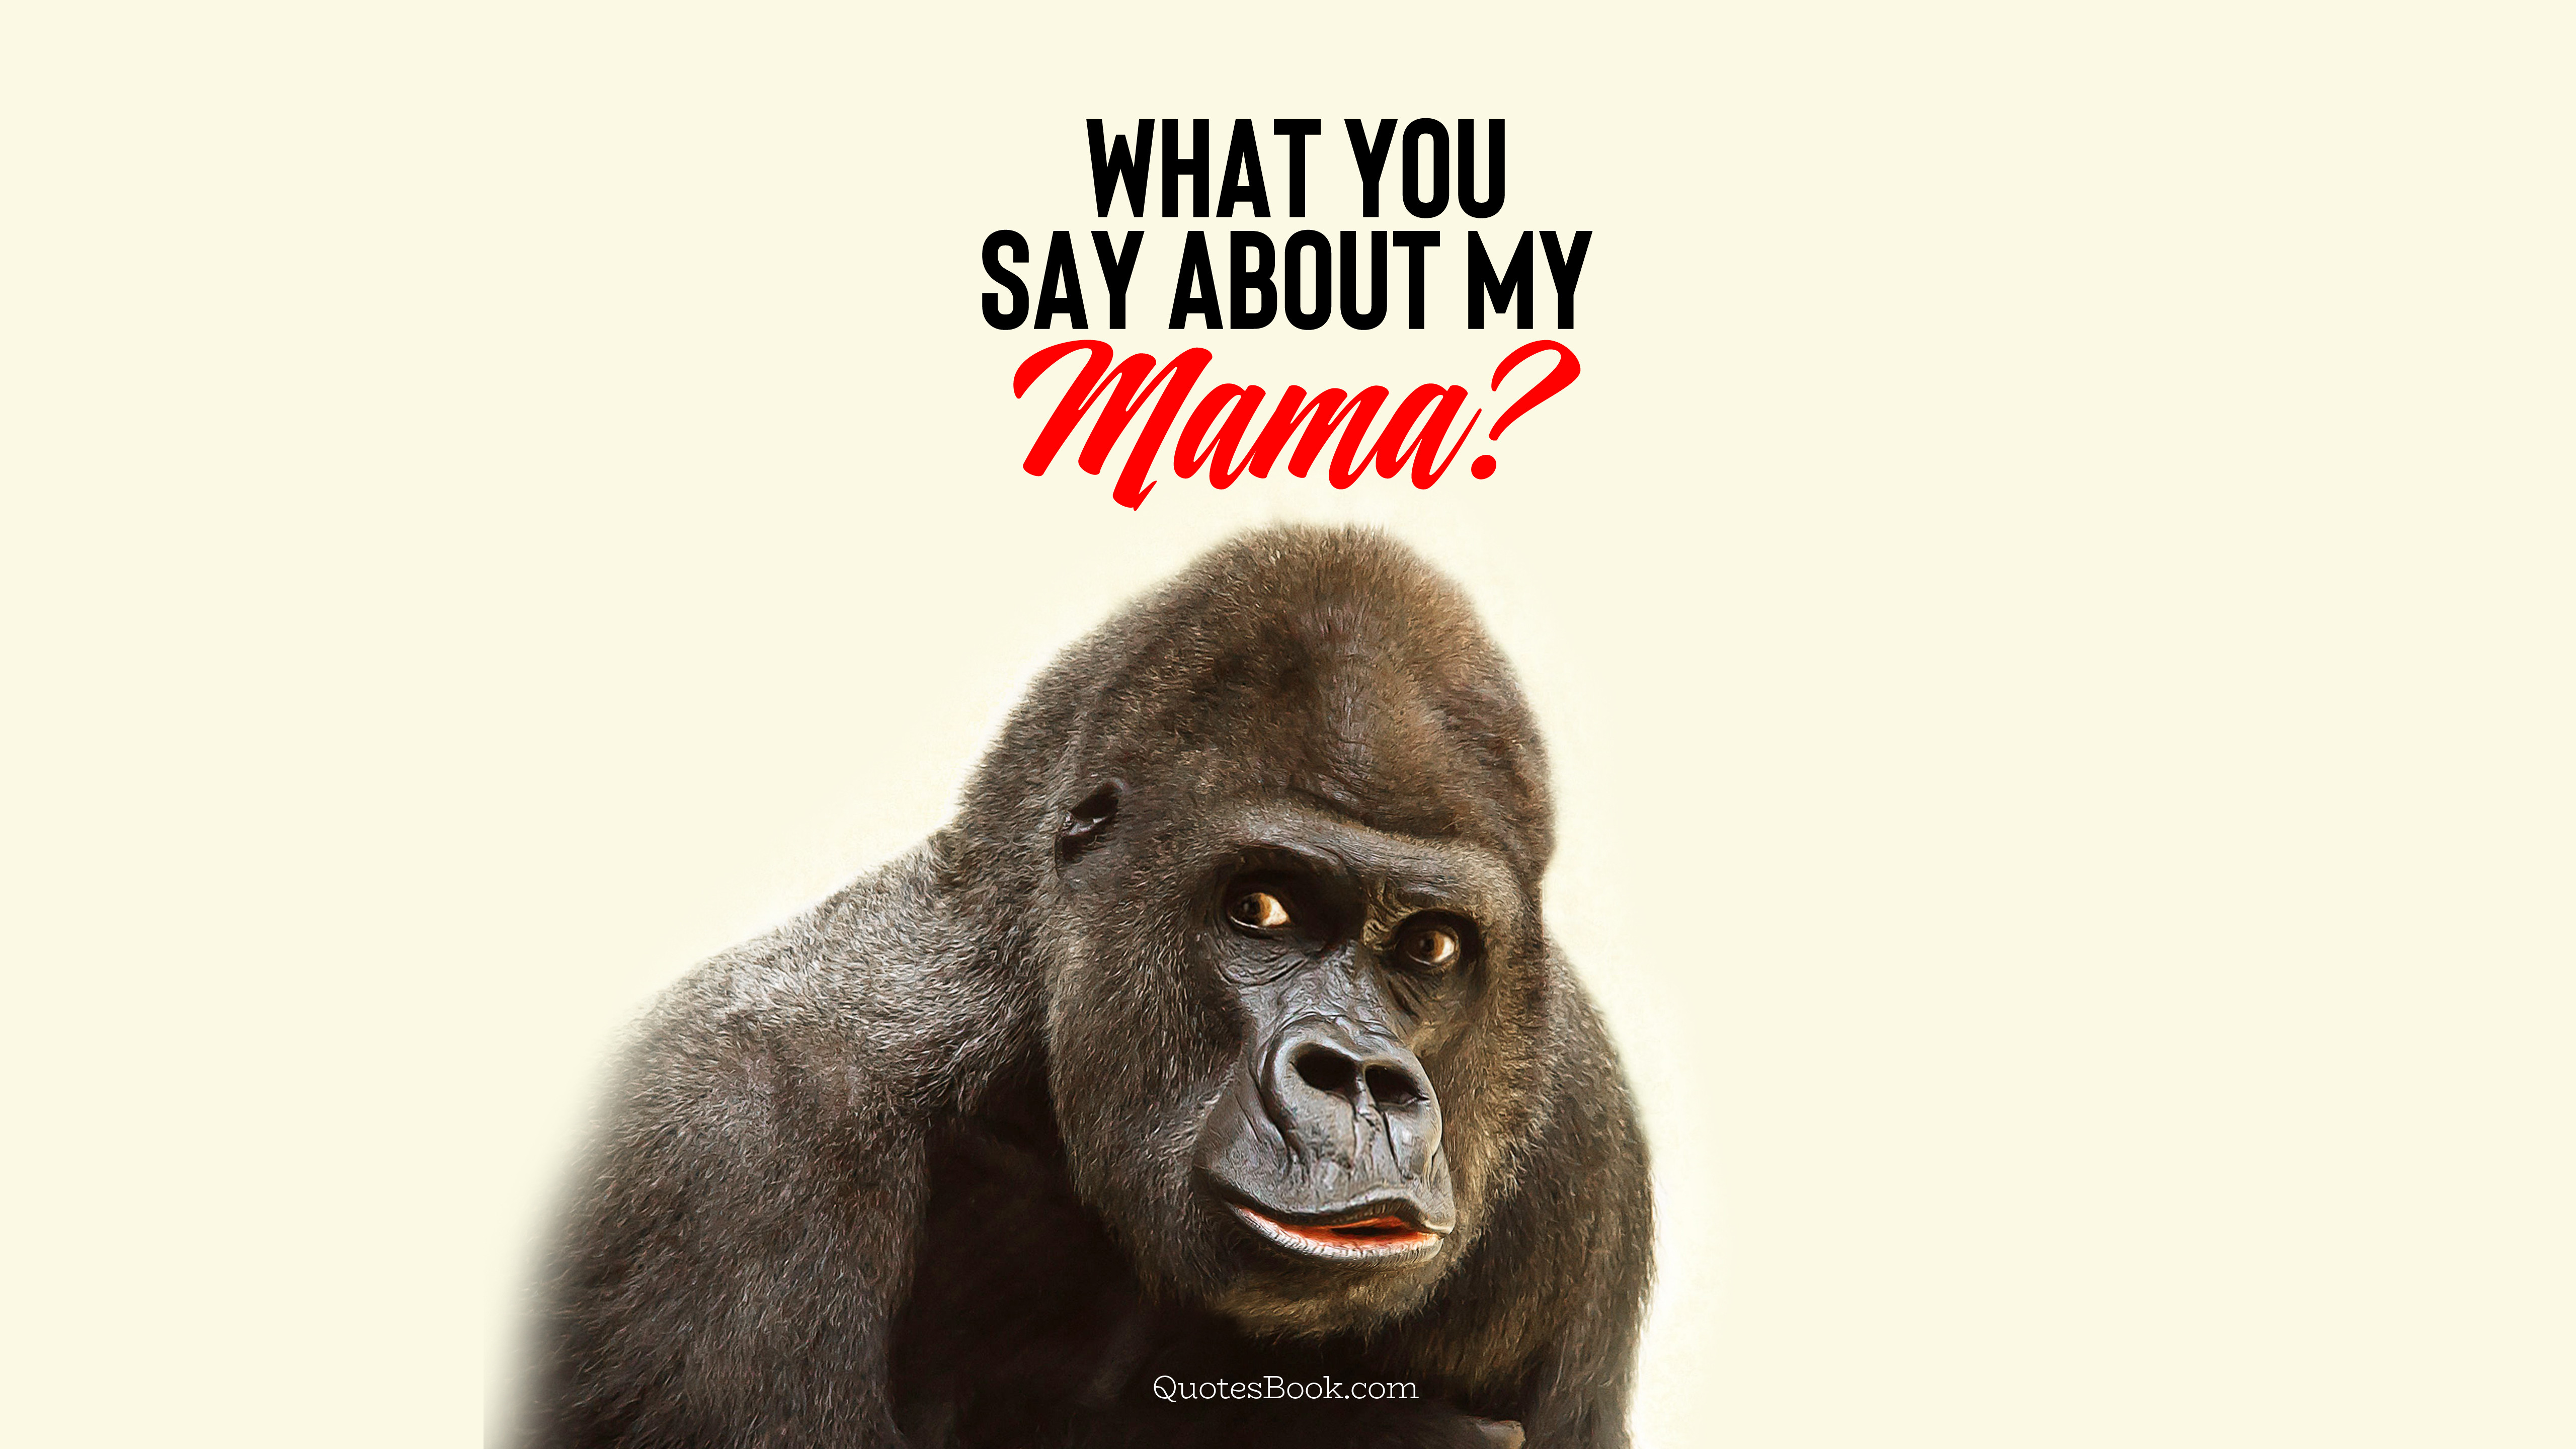 What you say about my mama? - QuotesBook